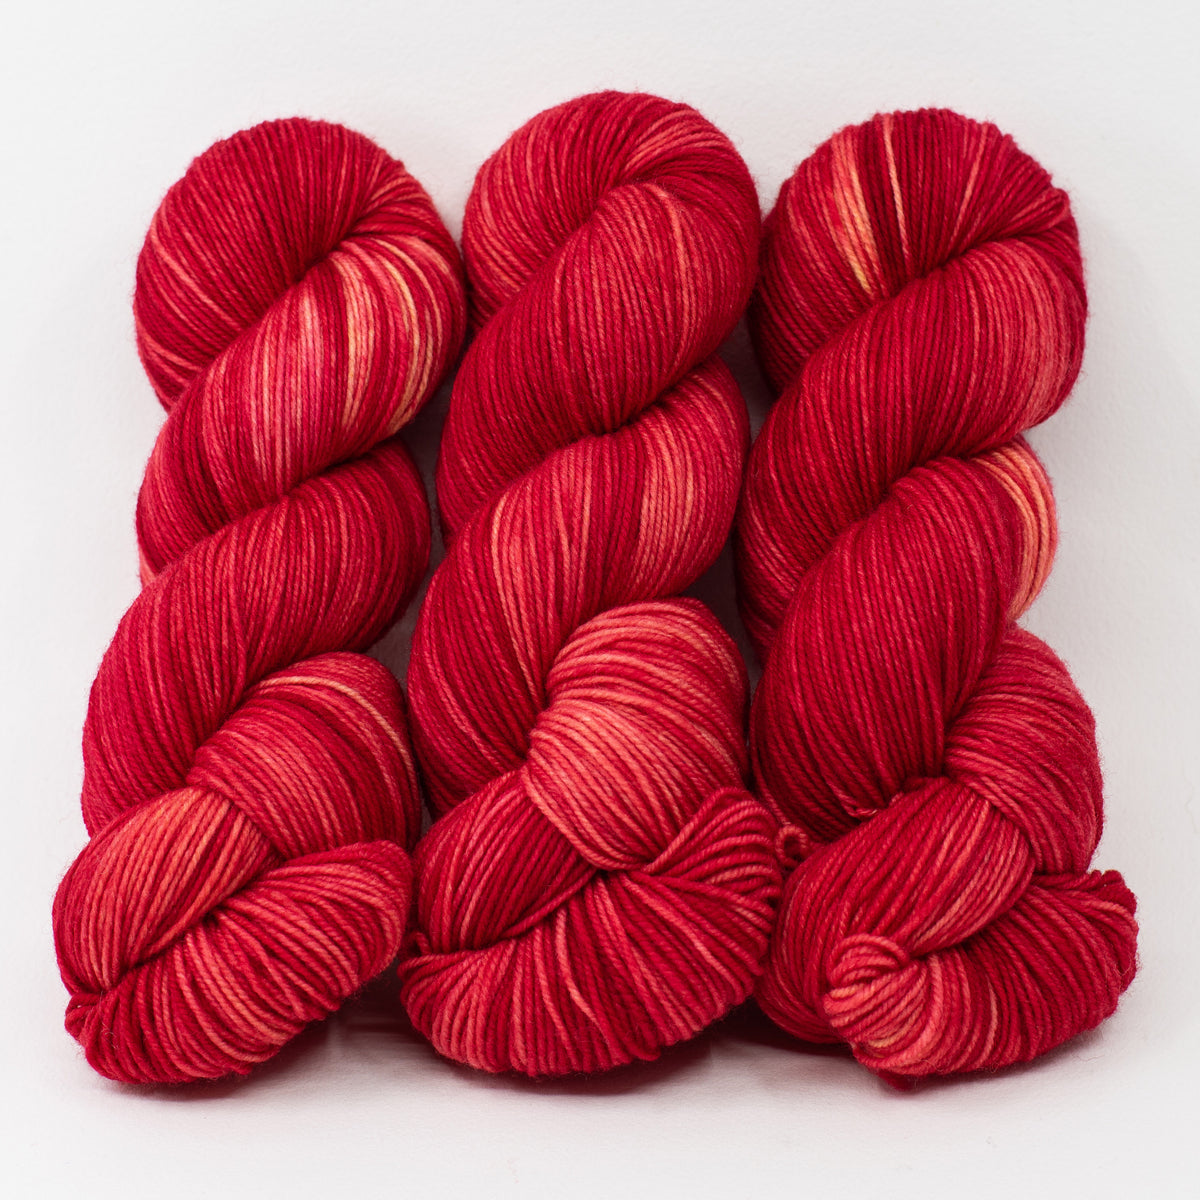 Apple - Revival Worsted - Dyed Stock